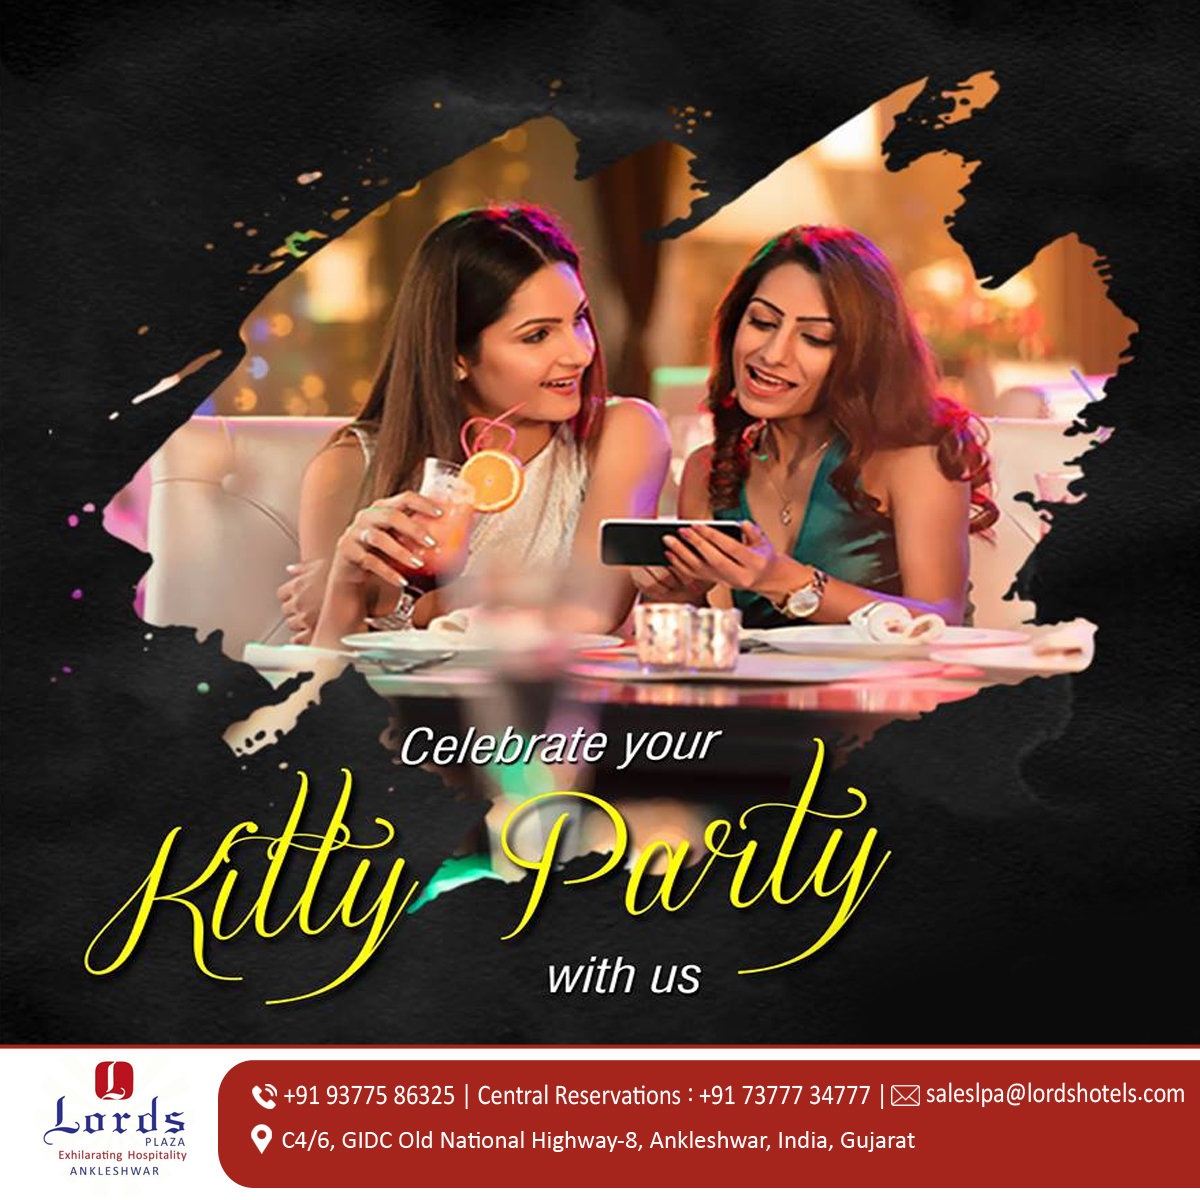 Celebrate Your Kitty Party More Special With #LordsPlazaAnkleshwar !!

#kittyparty #kittypartyvenue #kittypartygames #kittypartyindia #KittyPartyFun #KittyPartyMagic #ladiesparties